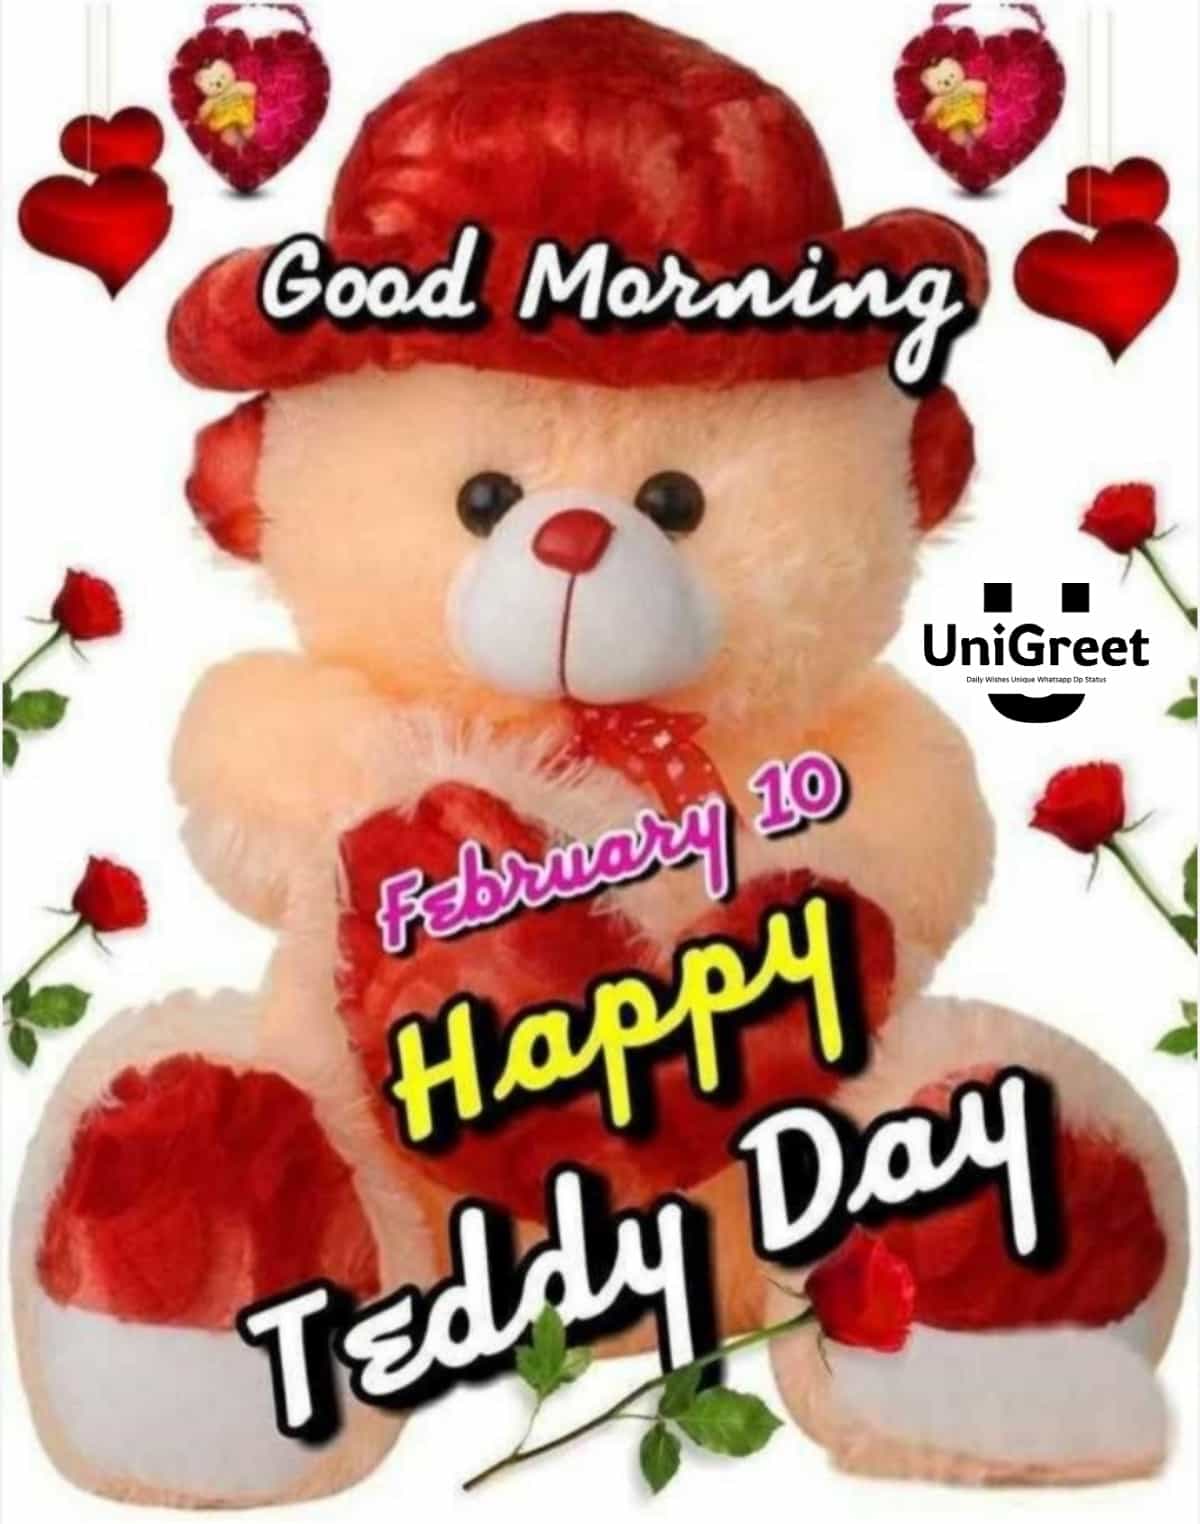 Happy Teddy Day Wishes Images, Quotes, Status, Pics, Photos Download